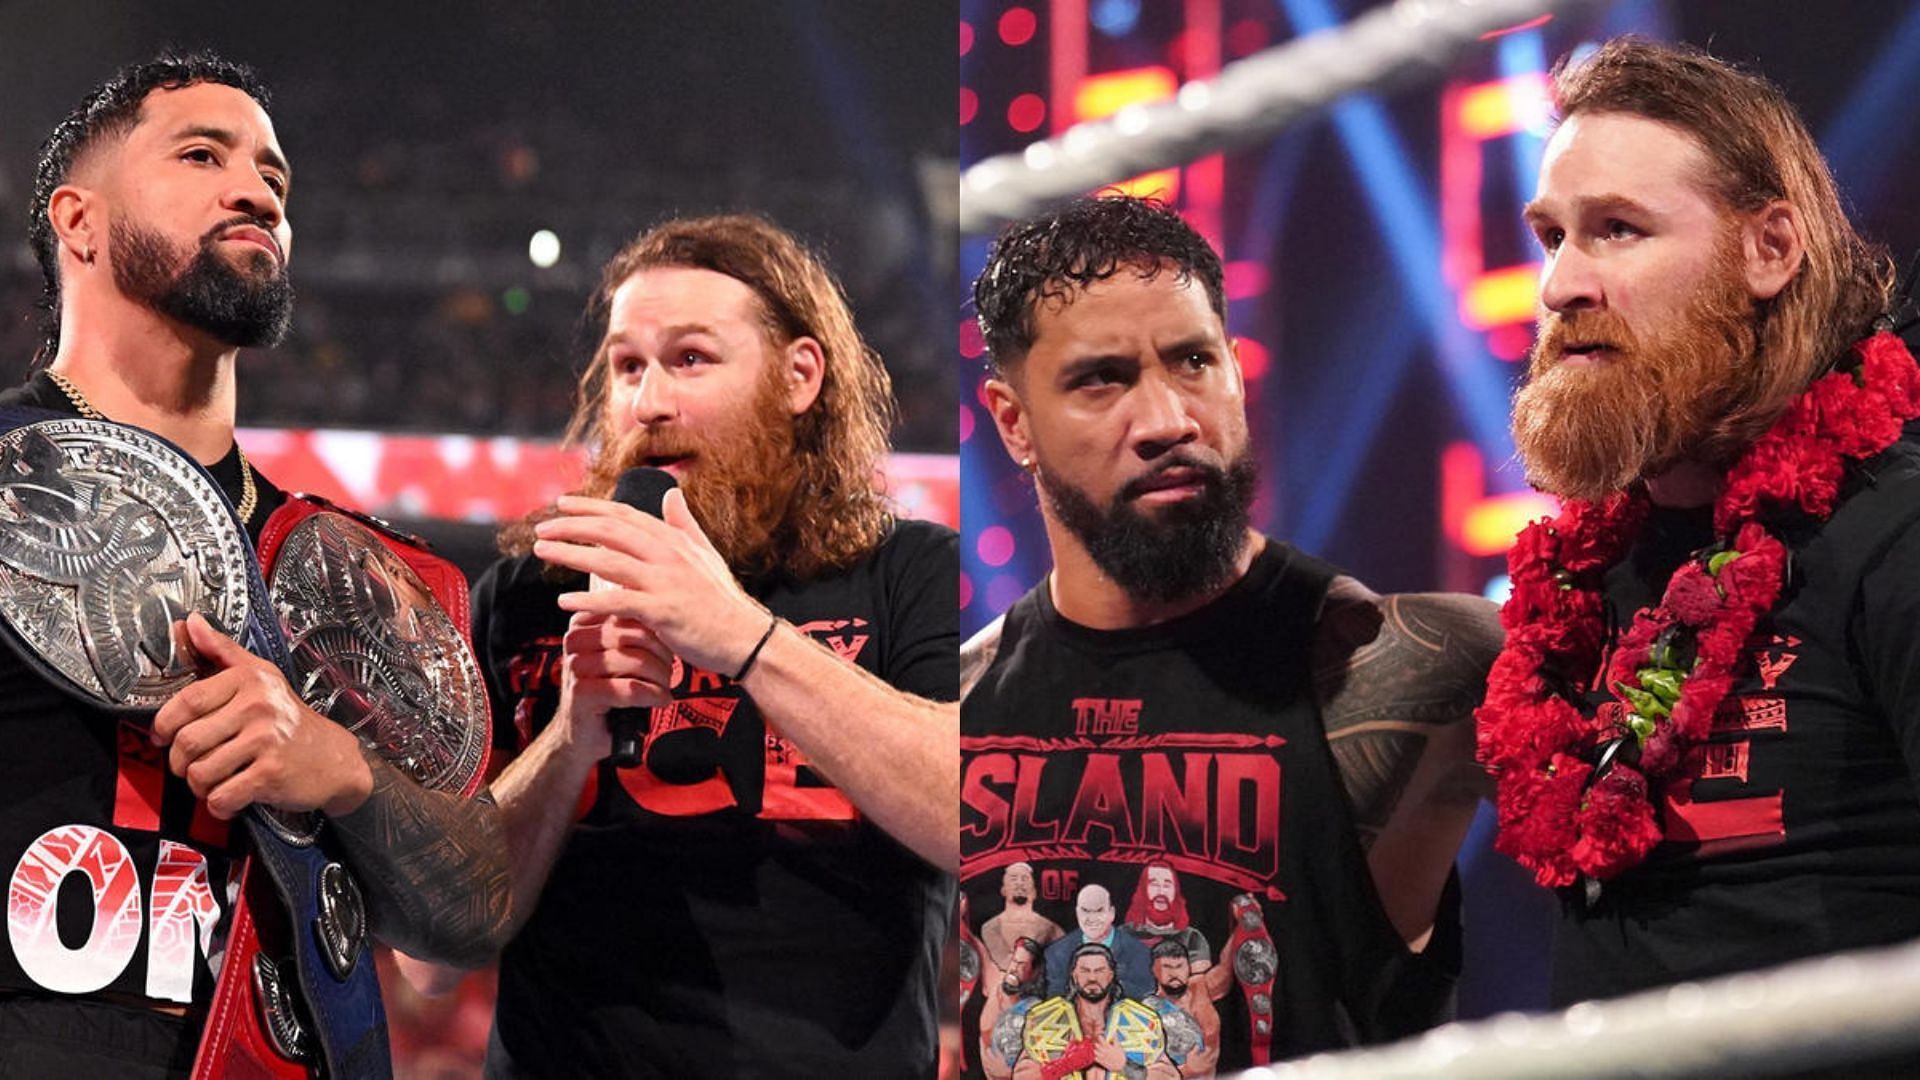 Sami Zayn and Jey Uso are former Bloodline stablemates